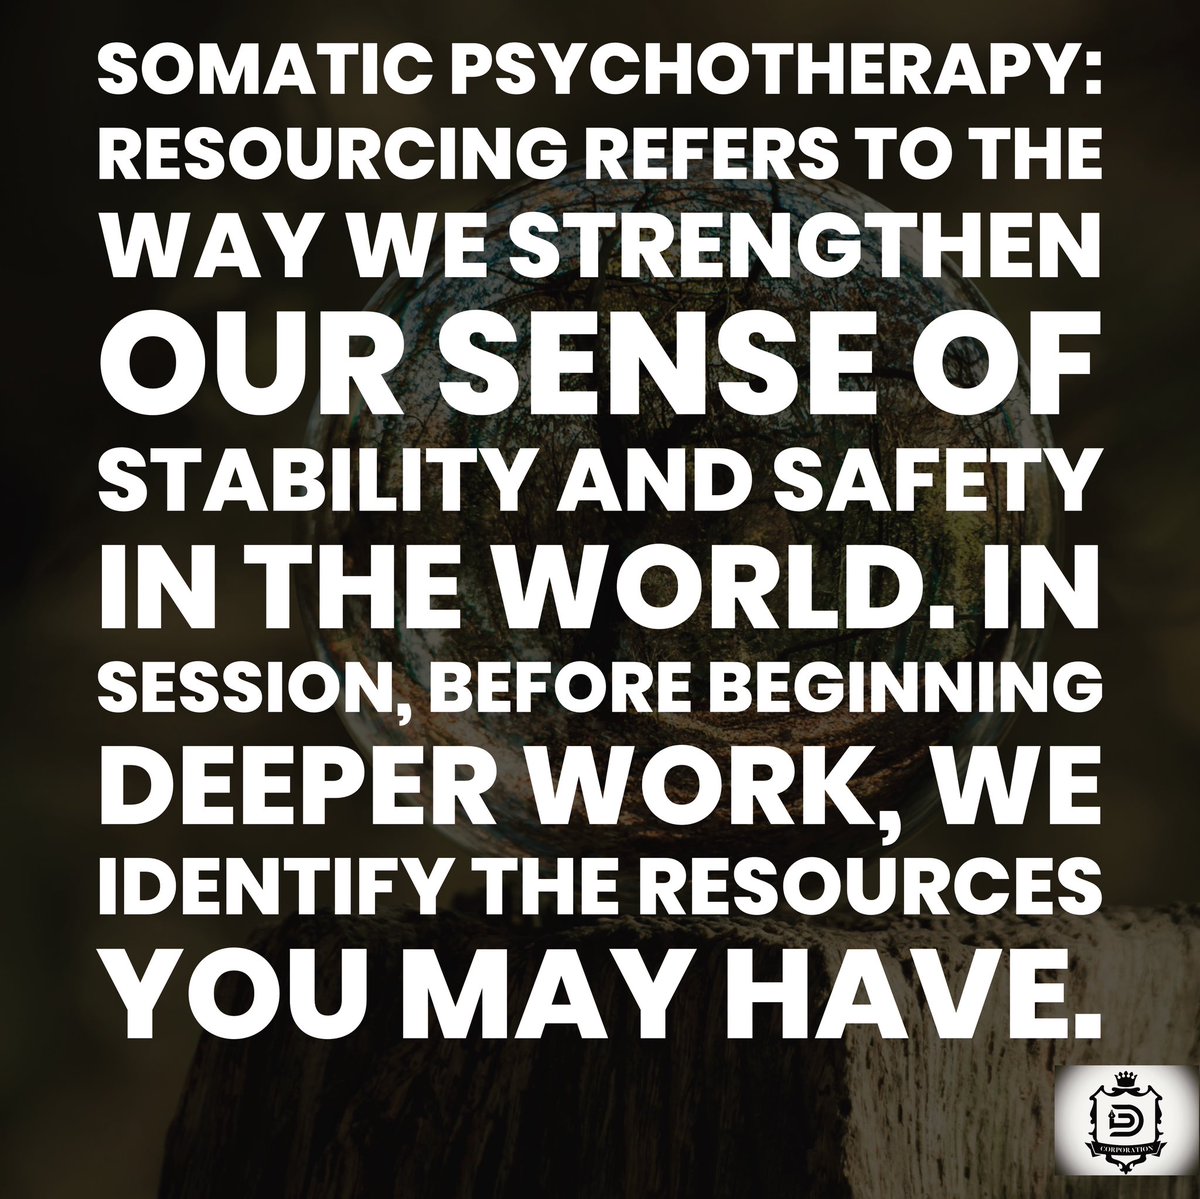 Often we will look at significant people, relationships,  ego strengths, experiences, times and places that strengthen a sense of safety and choice. 
#psychotherapy #life #therapy #therapist #psychology #behavior #discipline #lifestyle #somaticexperiencing #inspiration #trust